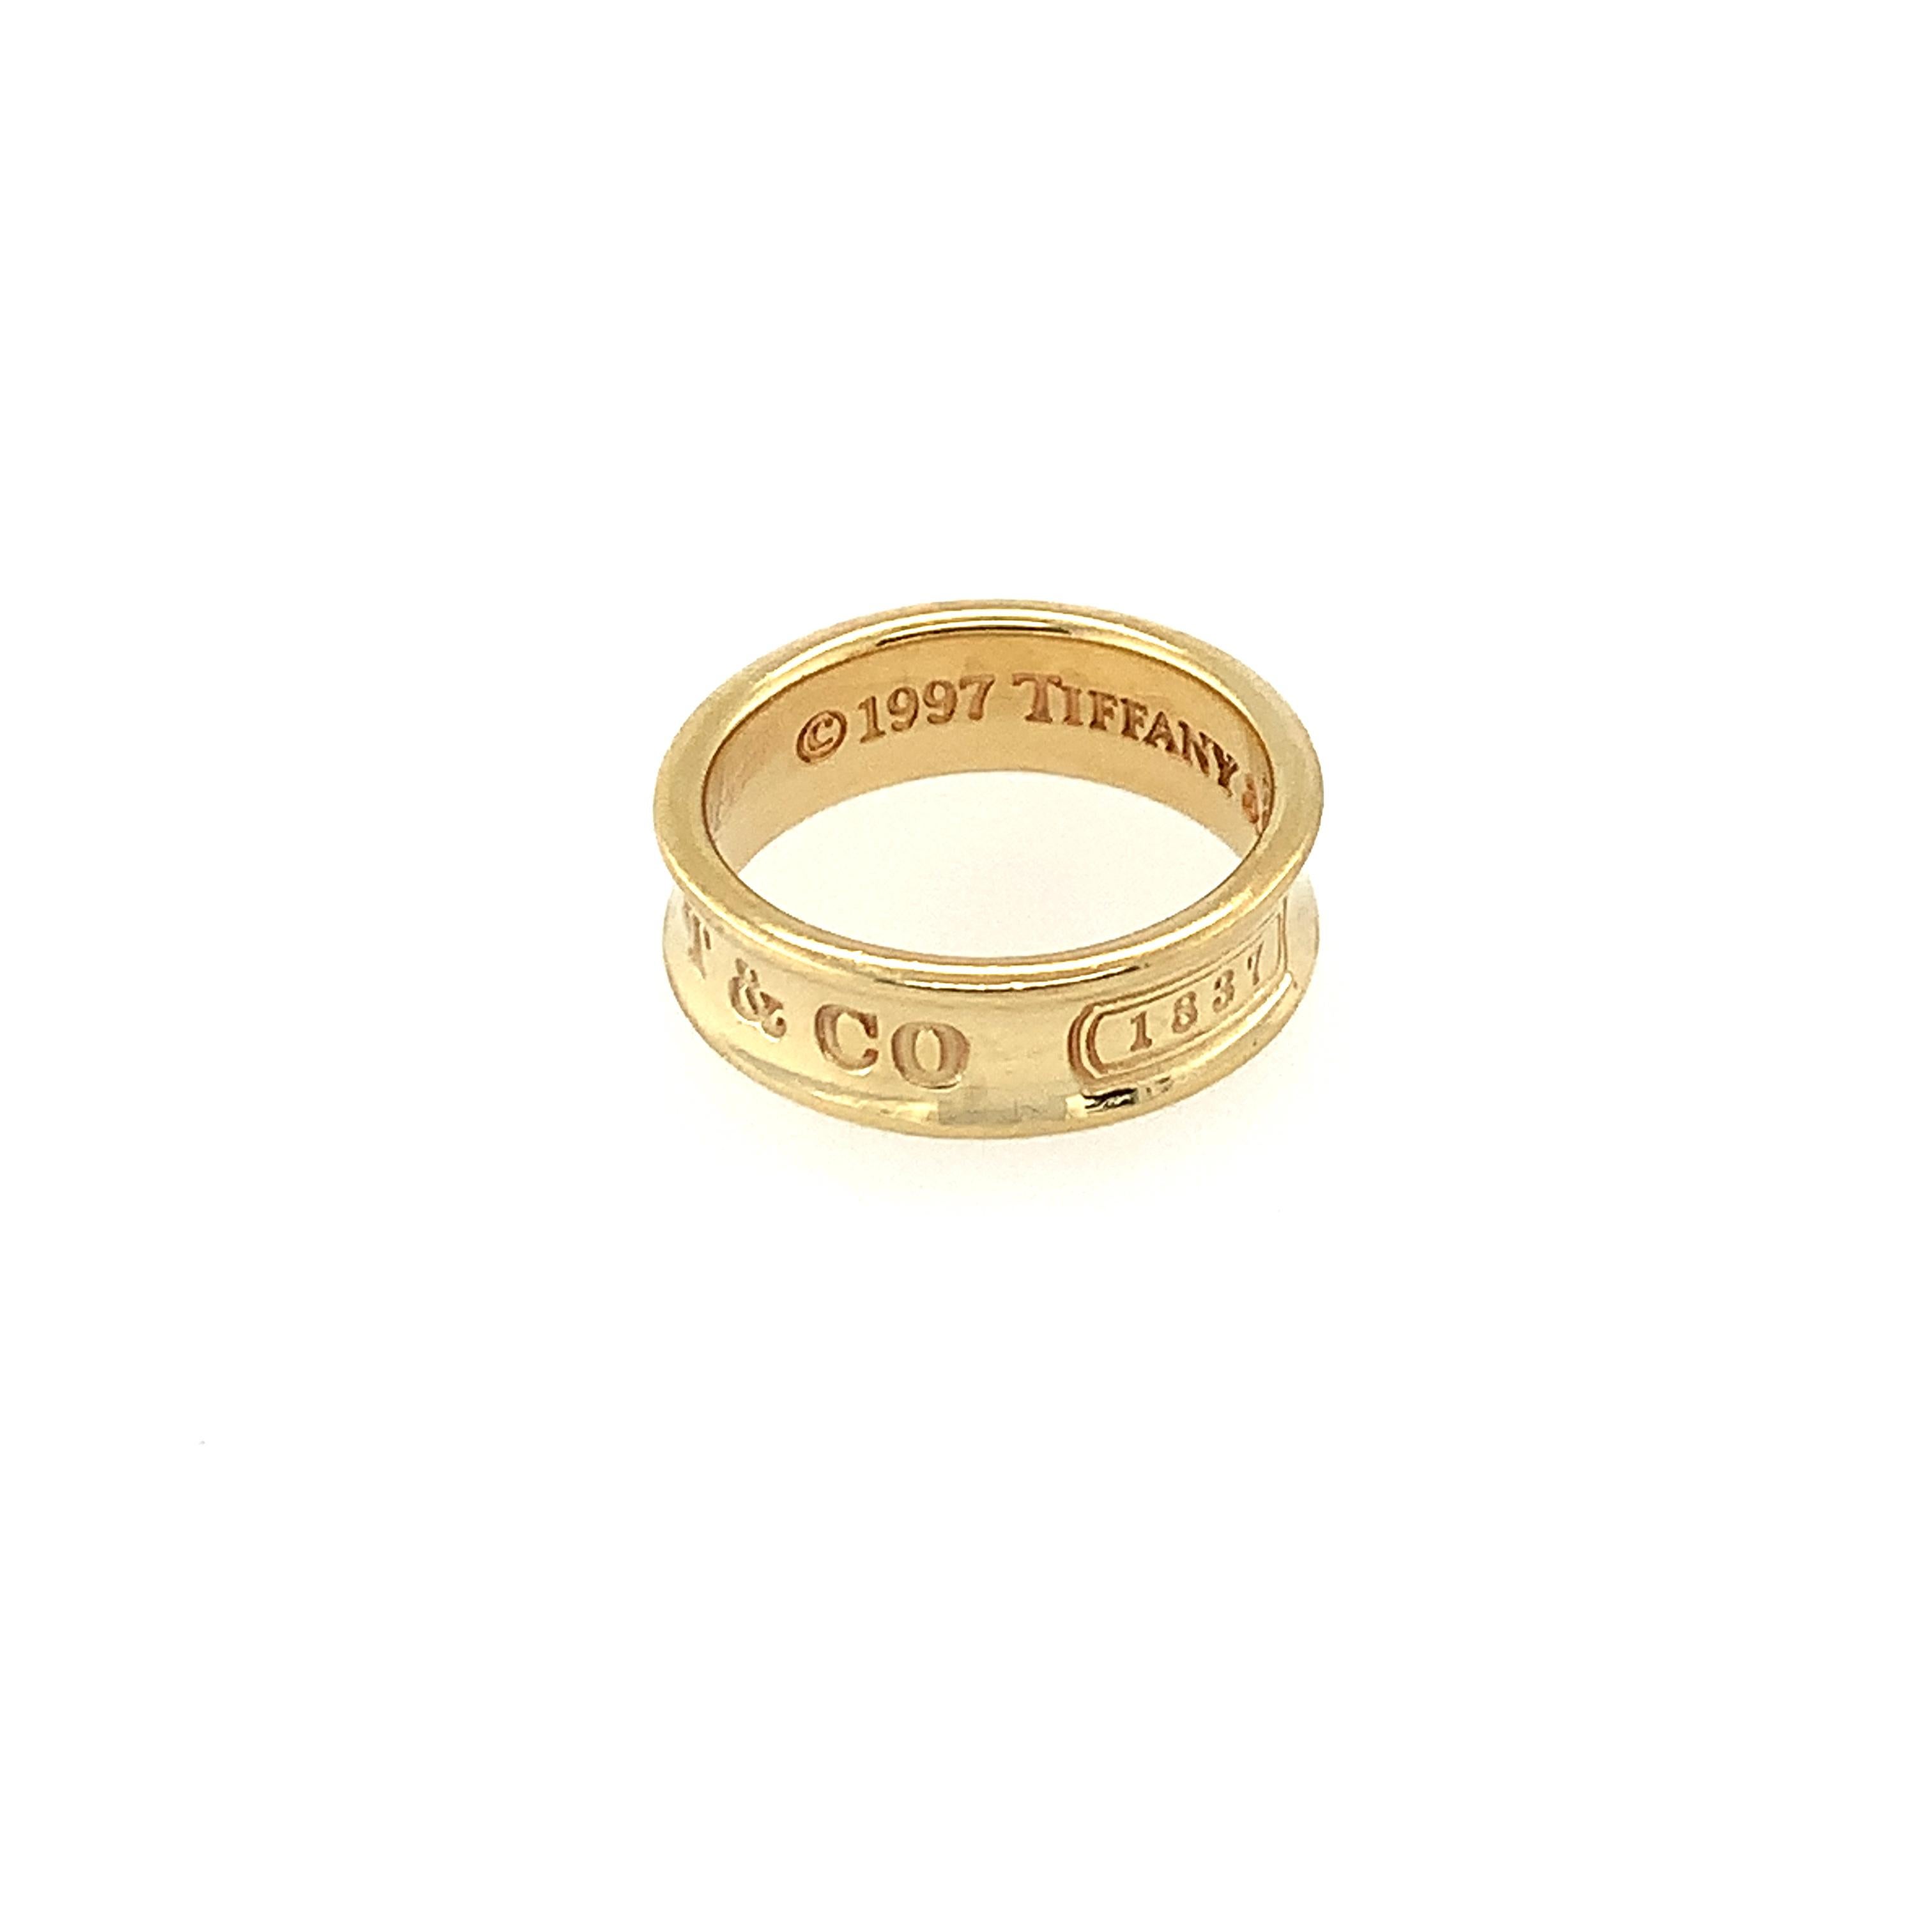 Contemporary Tiffany & Co. 1837 Collection Engraved 18K Gold Ring